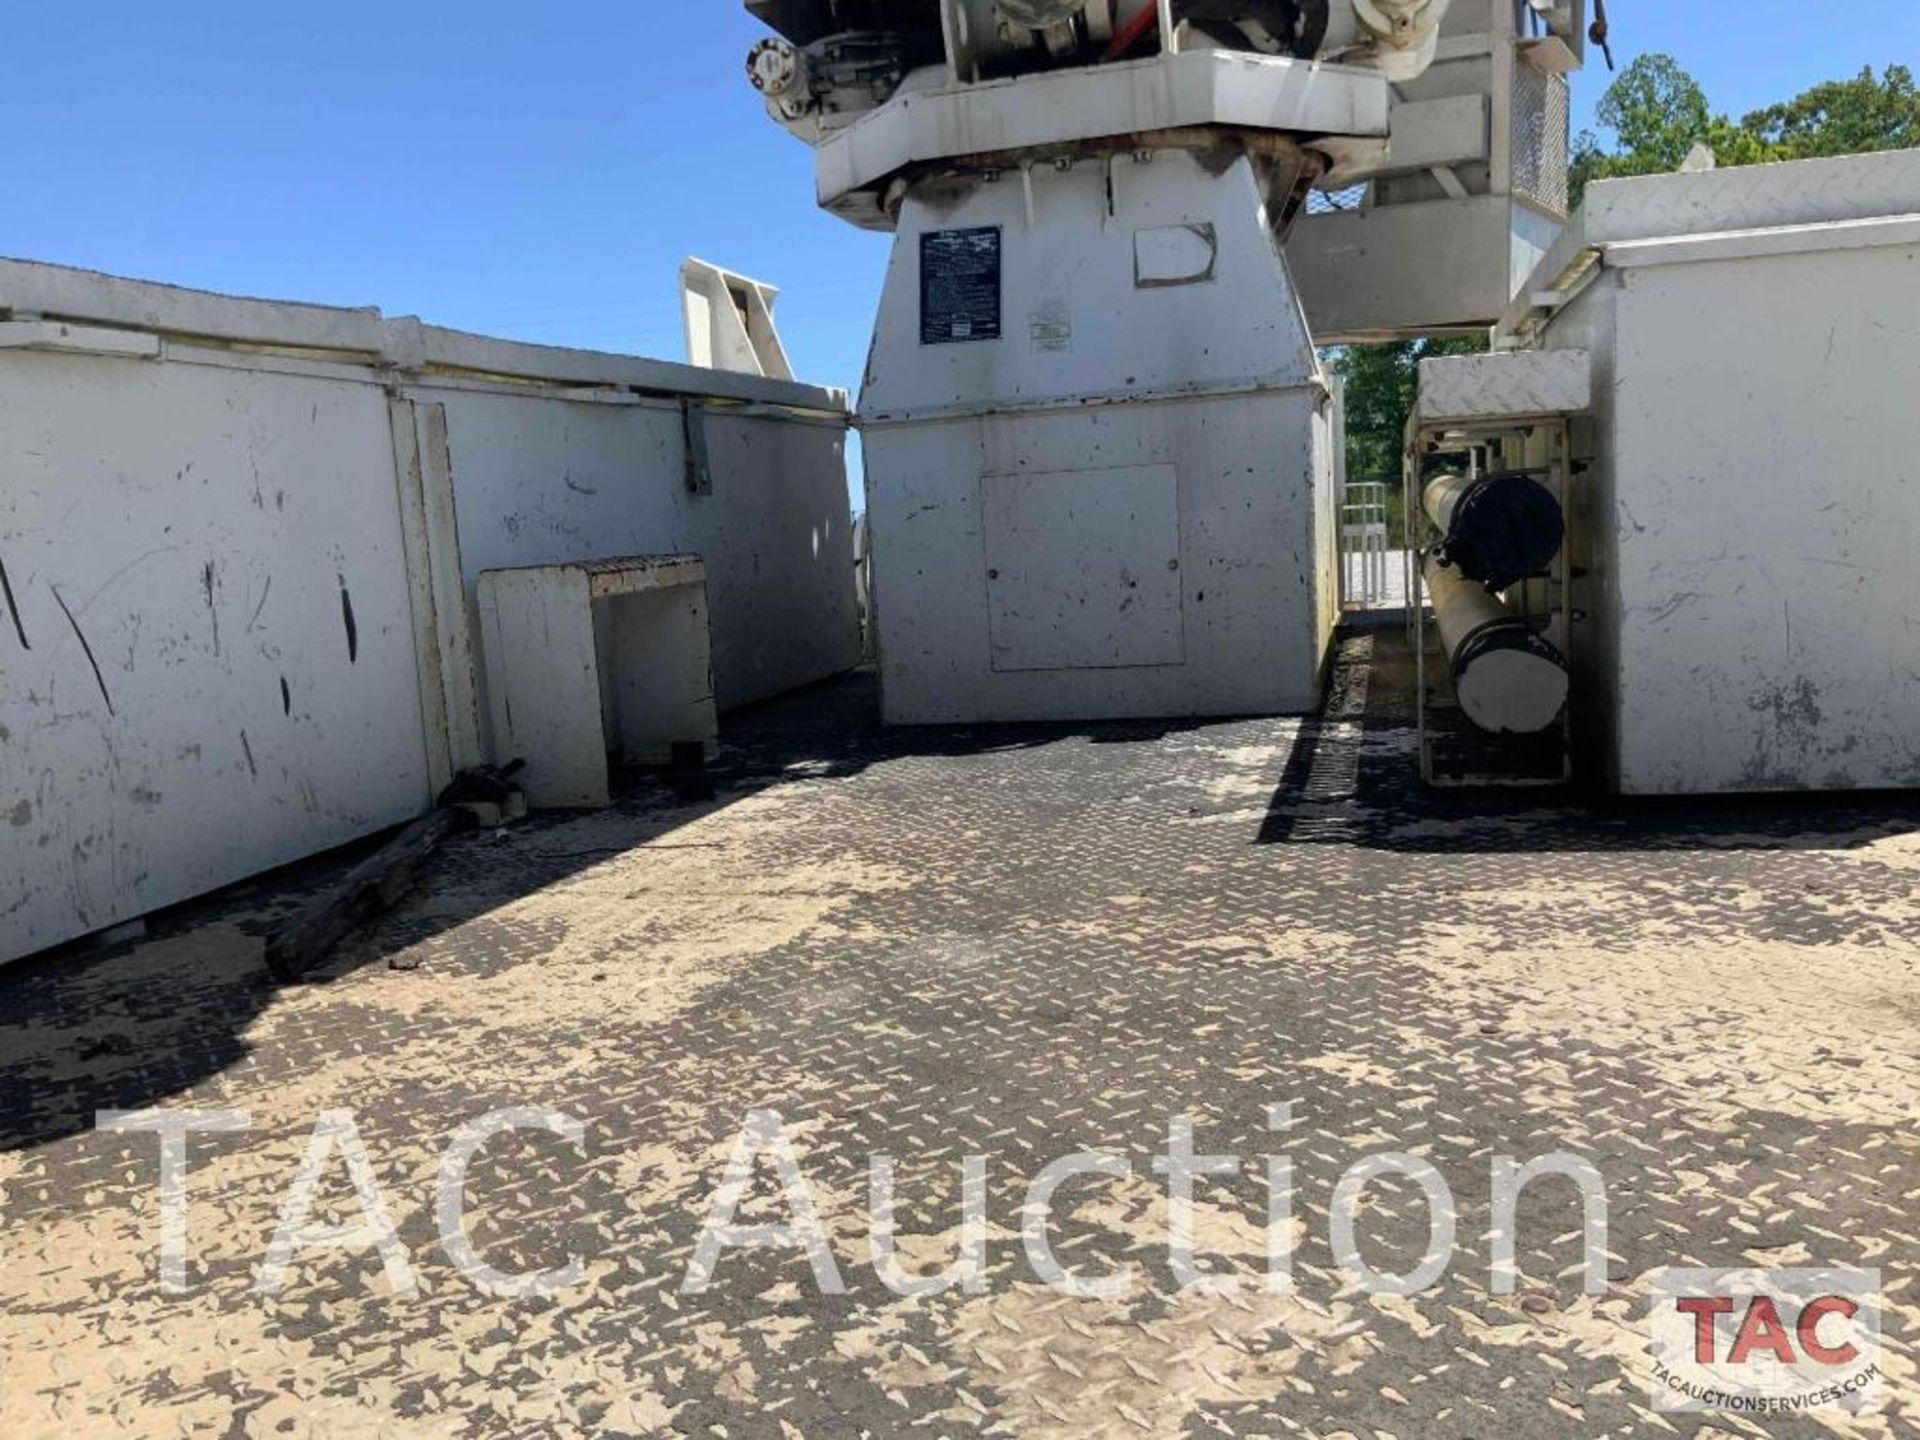 2005 ALTEC AH100 Articulating Non-Overcenter Aerial Bucket Truck Body Only - Image 29 of 69